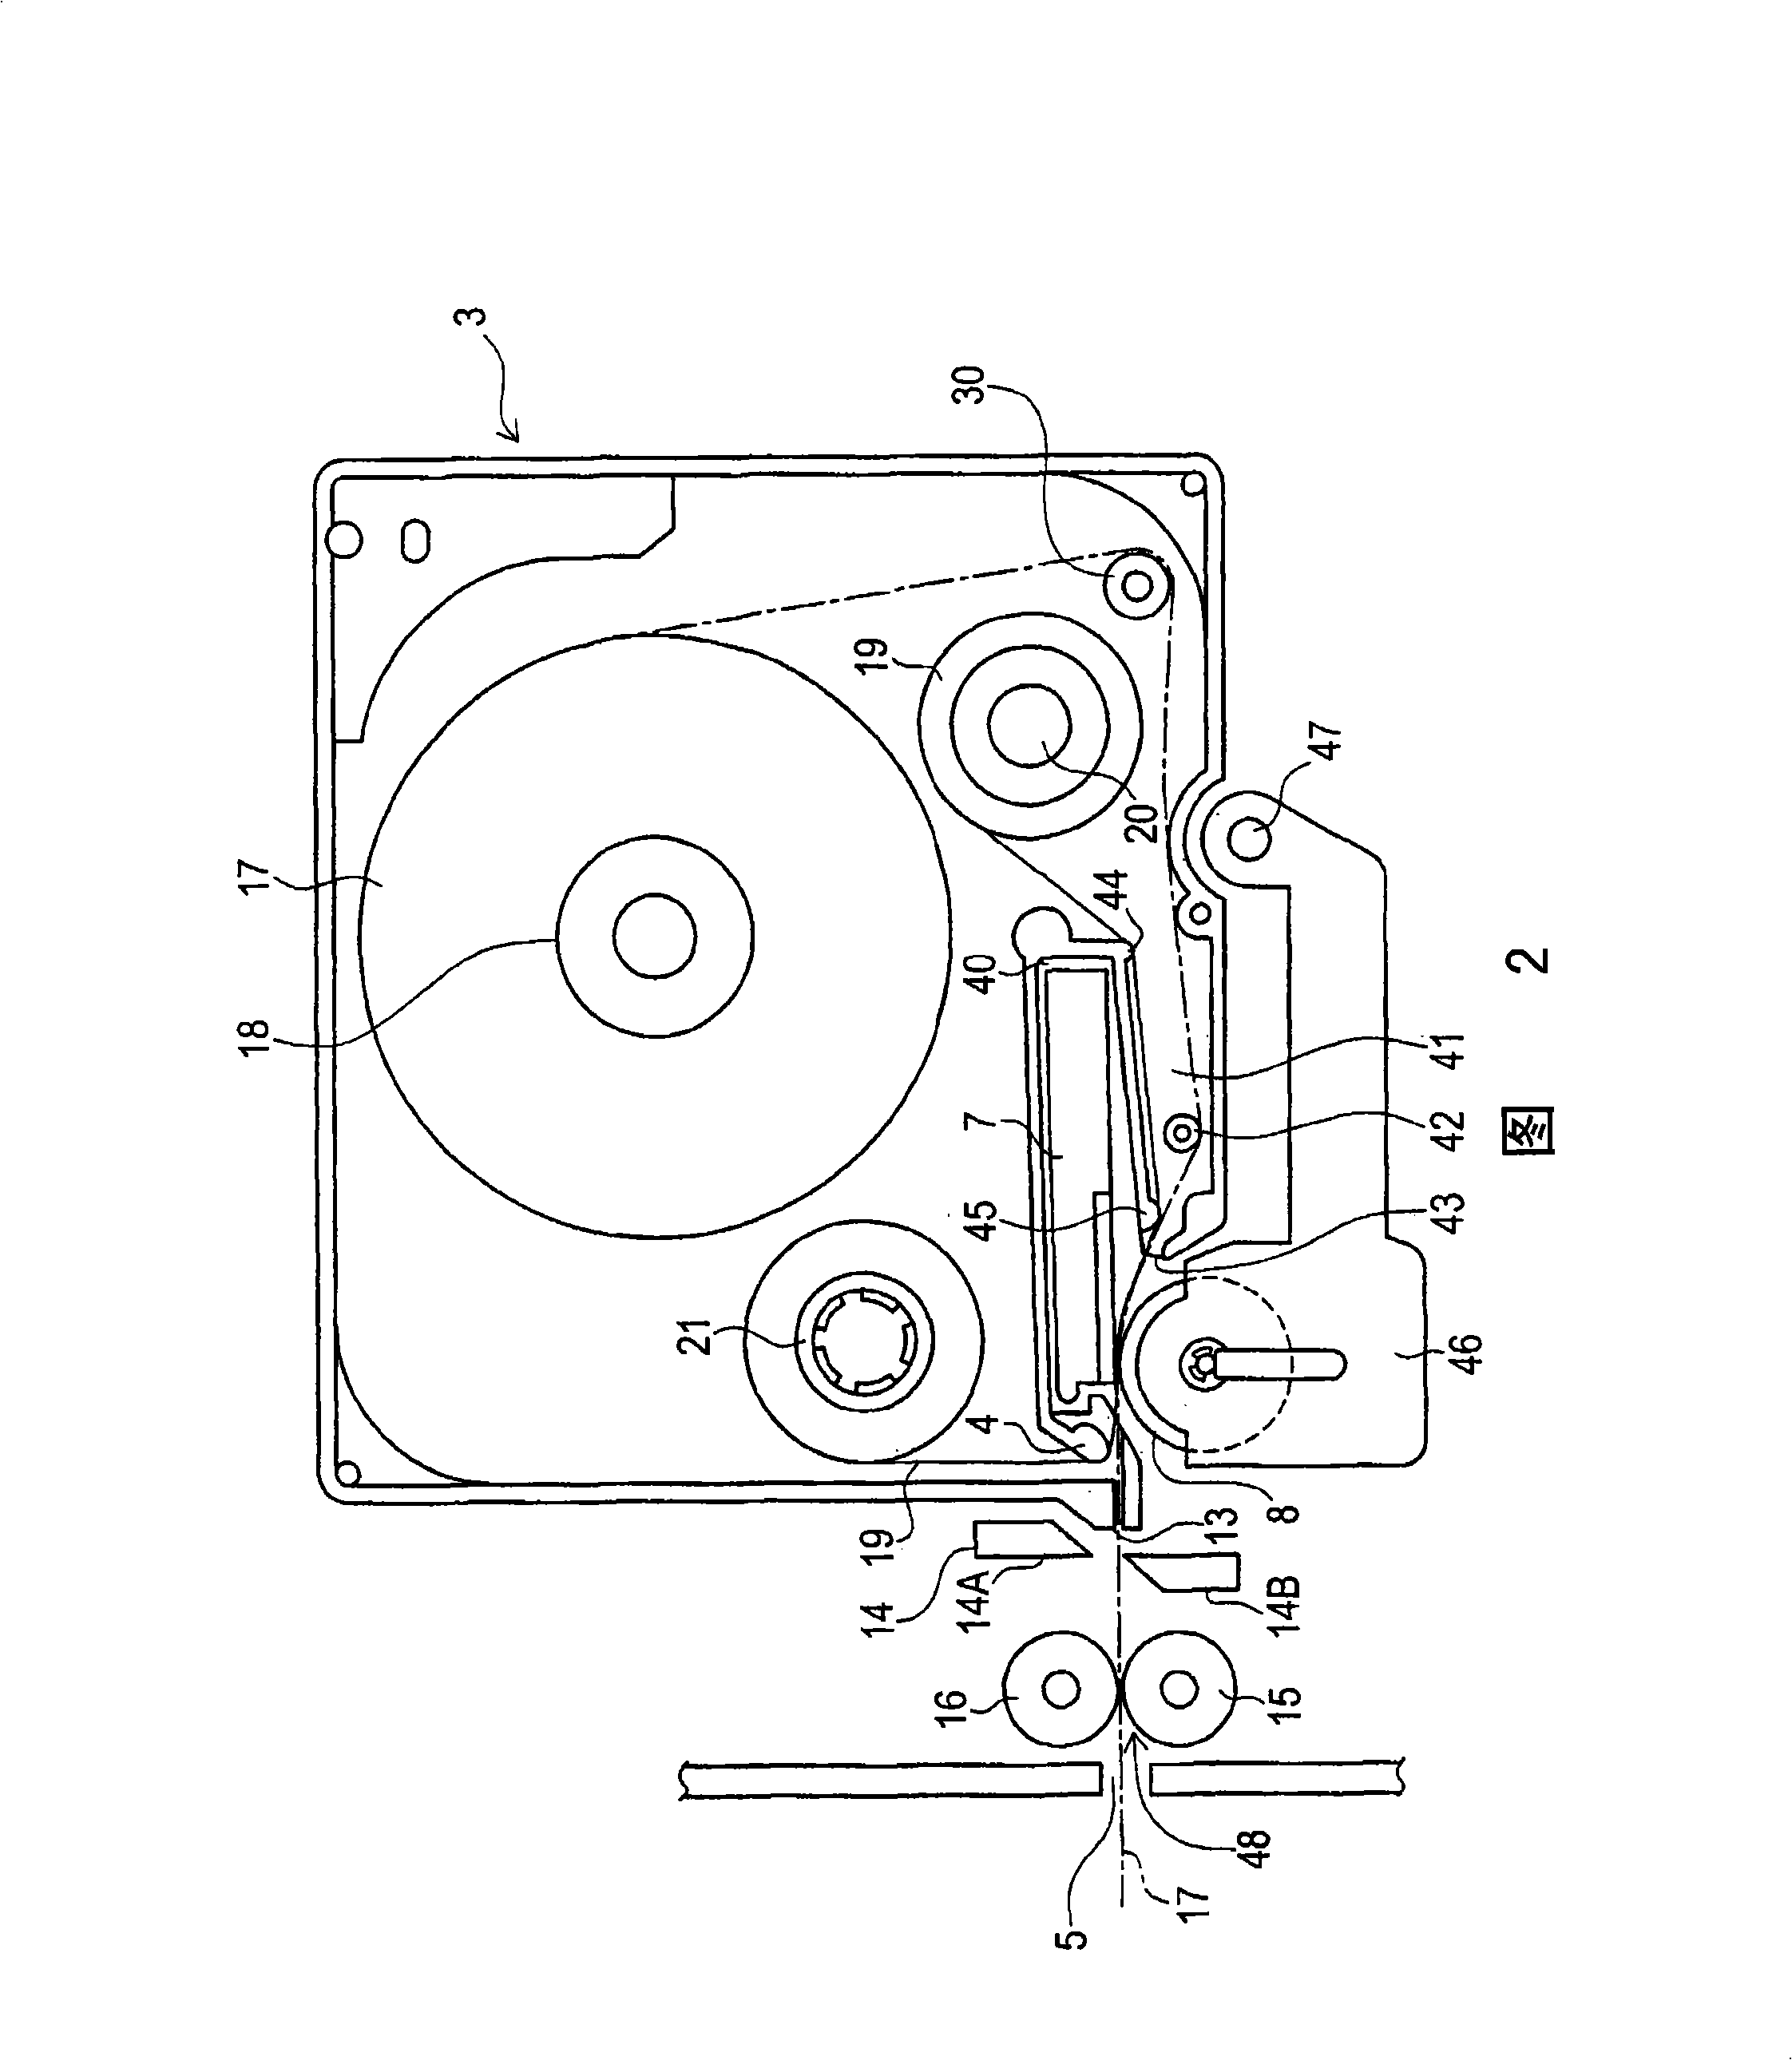 Tape cassette and tape printing system